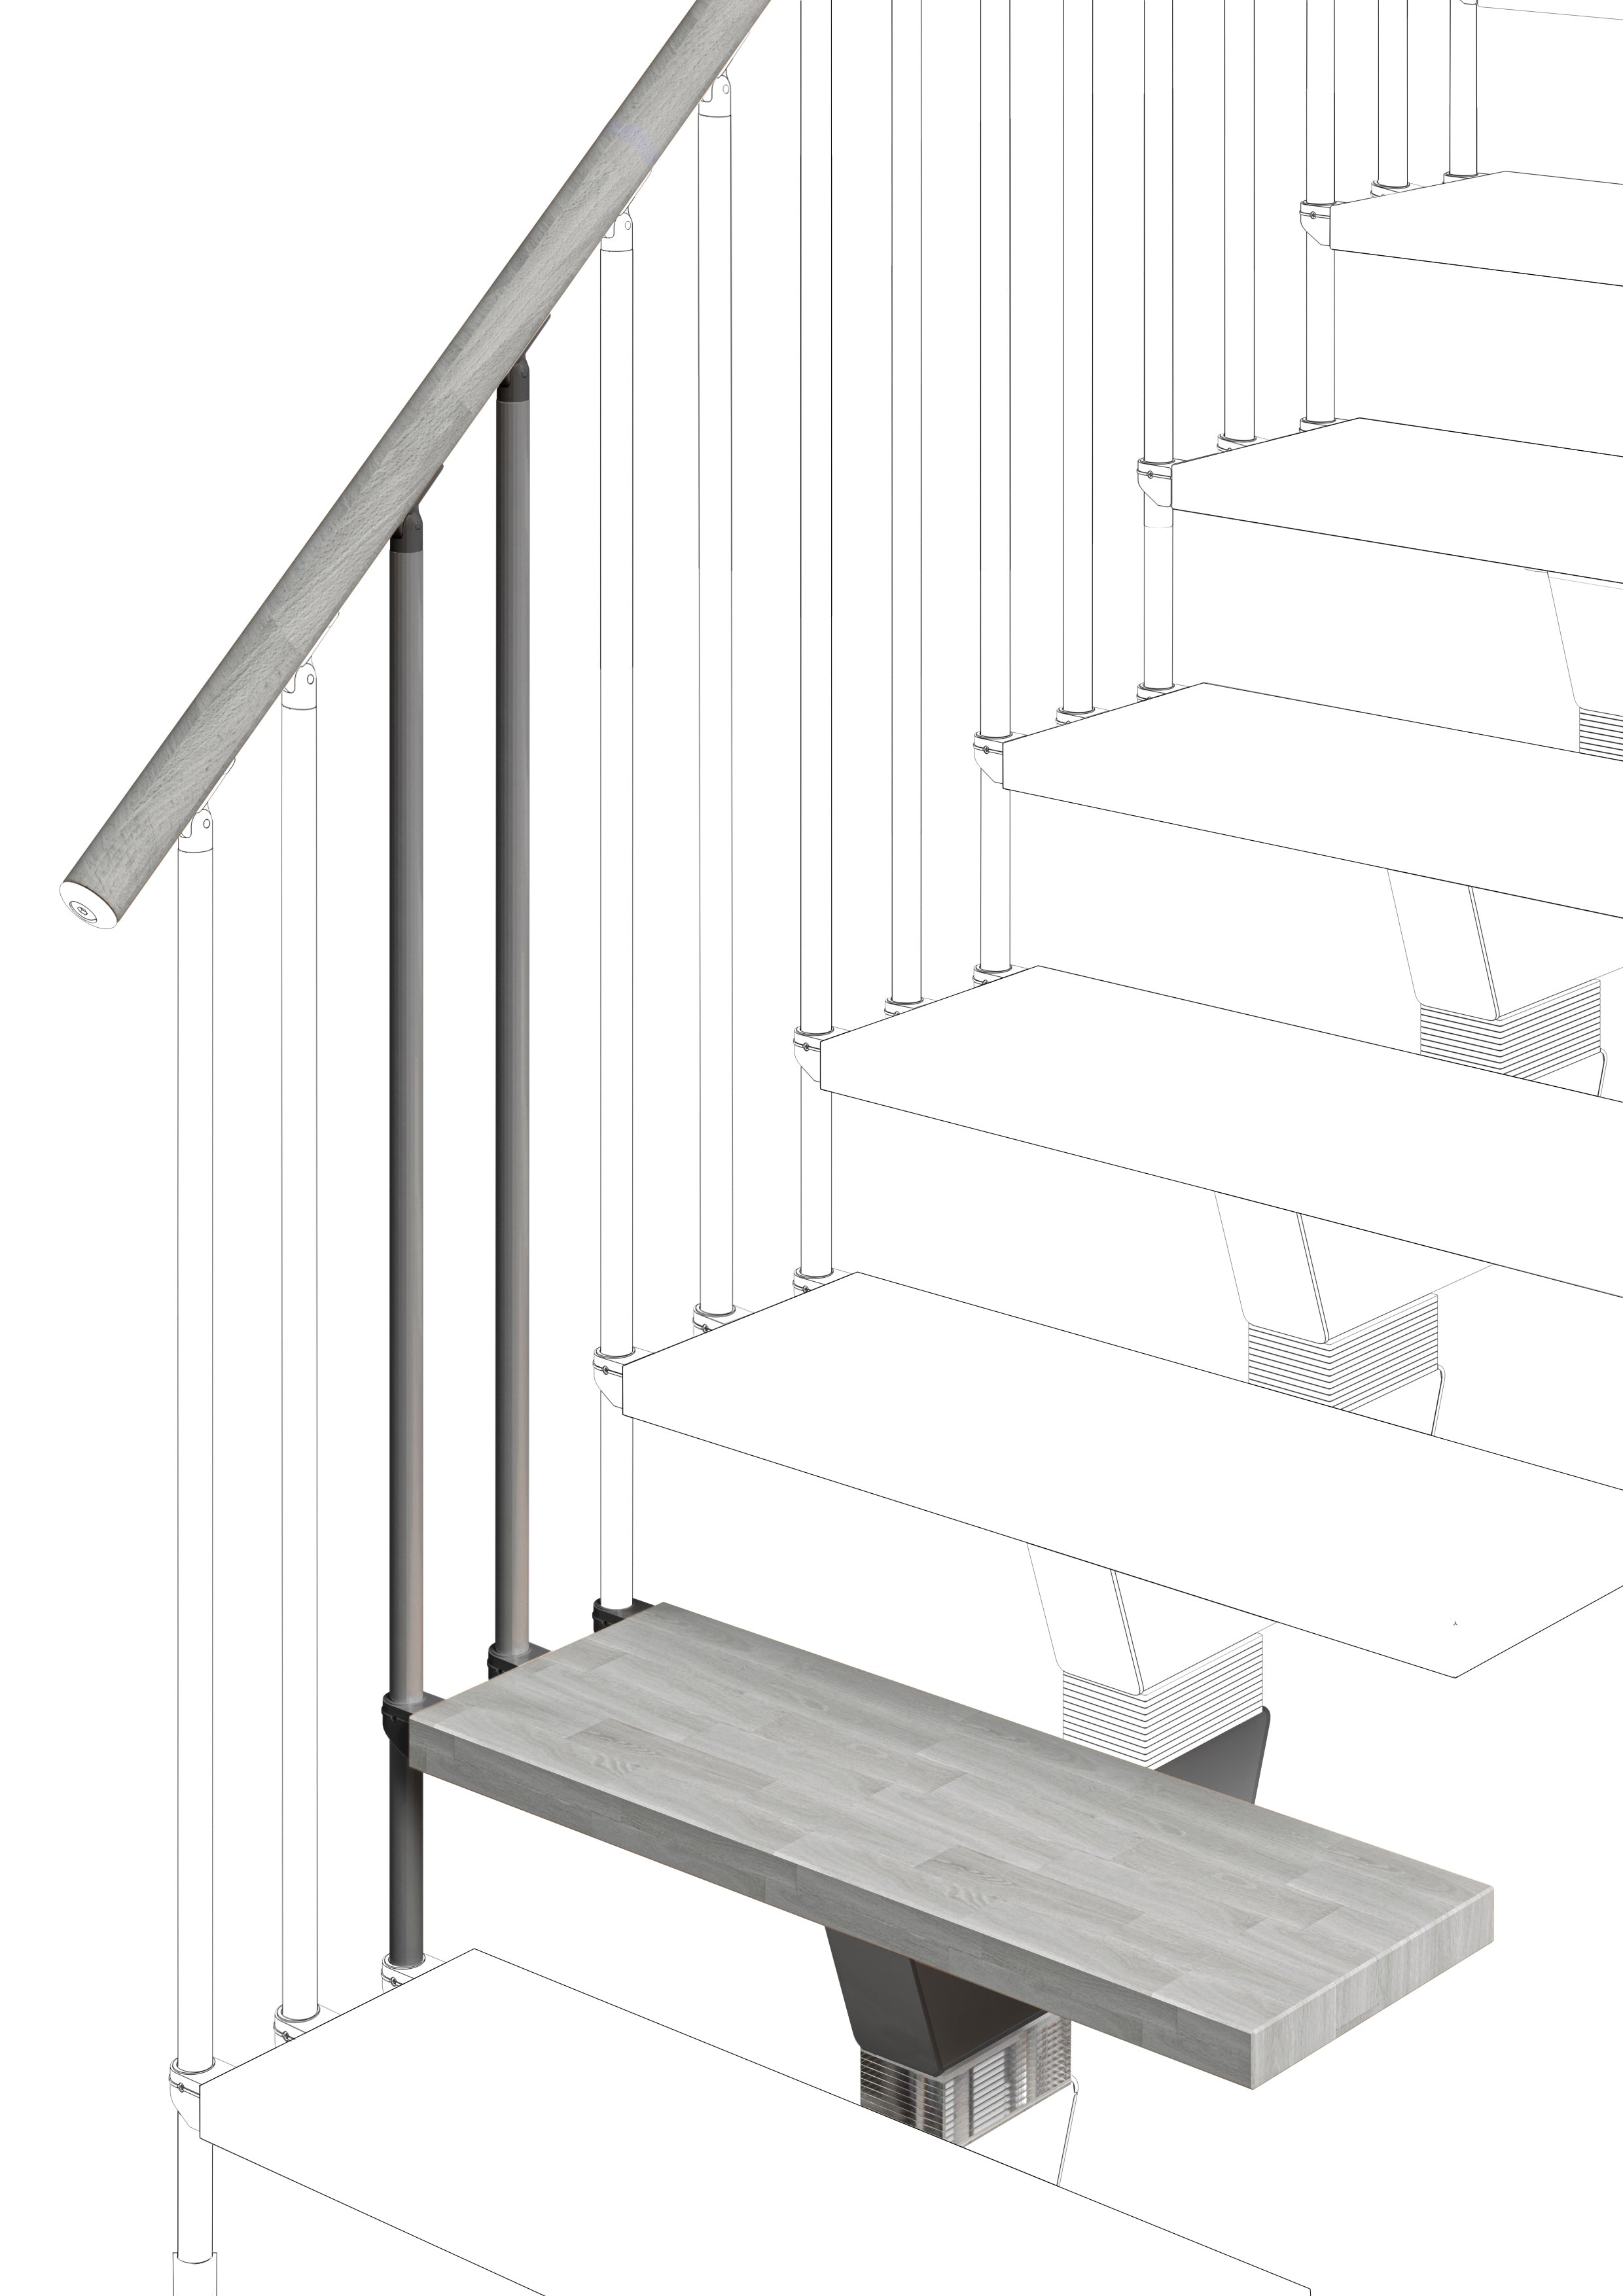 Additional step Modularis 95cm (with structure and railing) - Cement 89